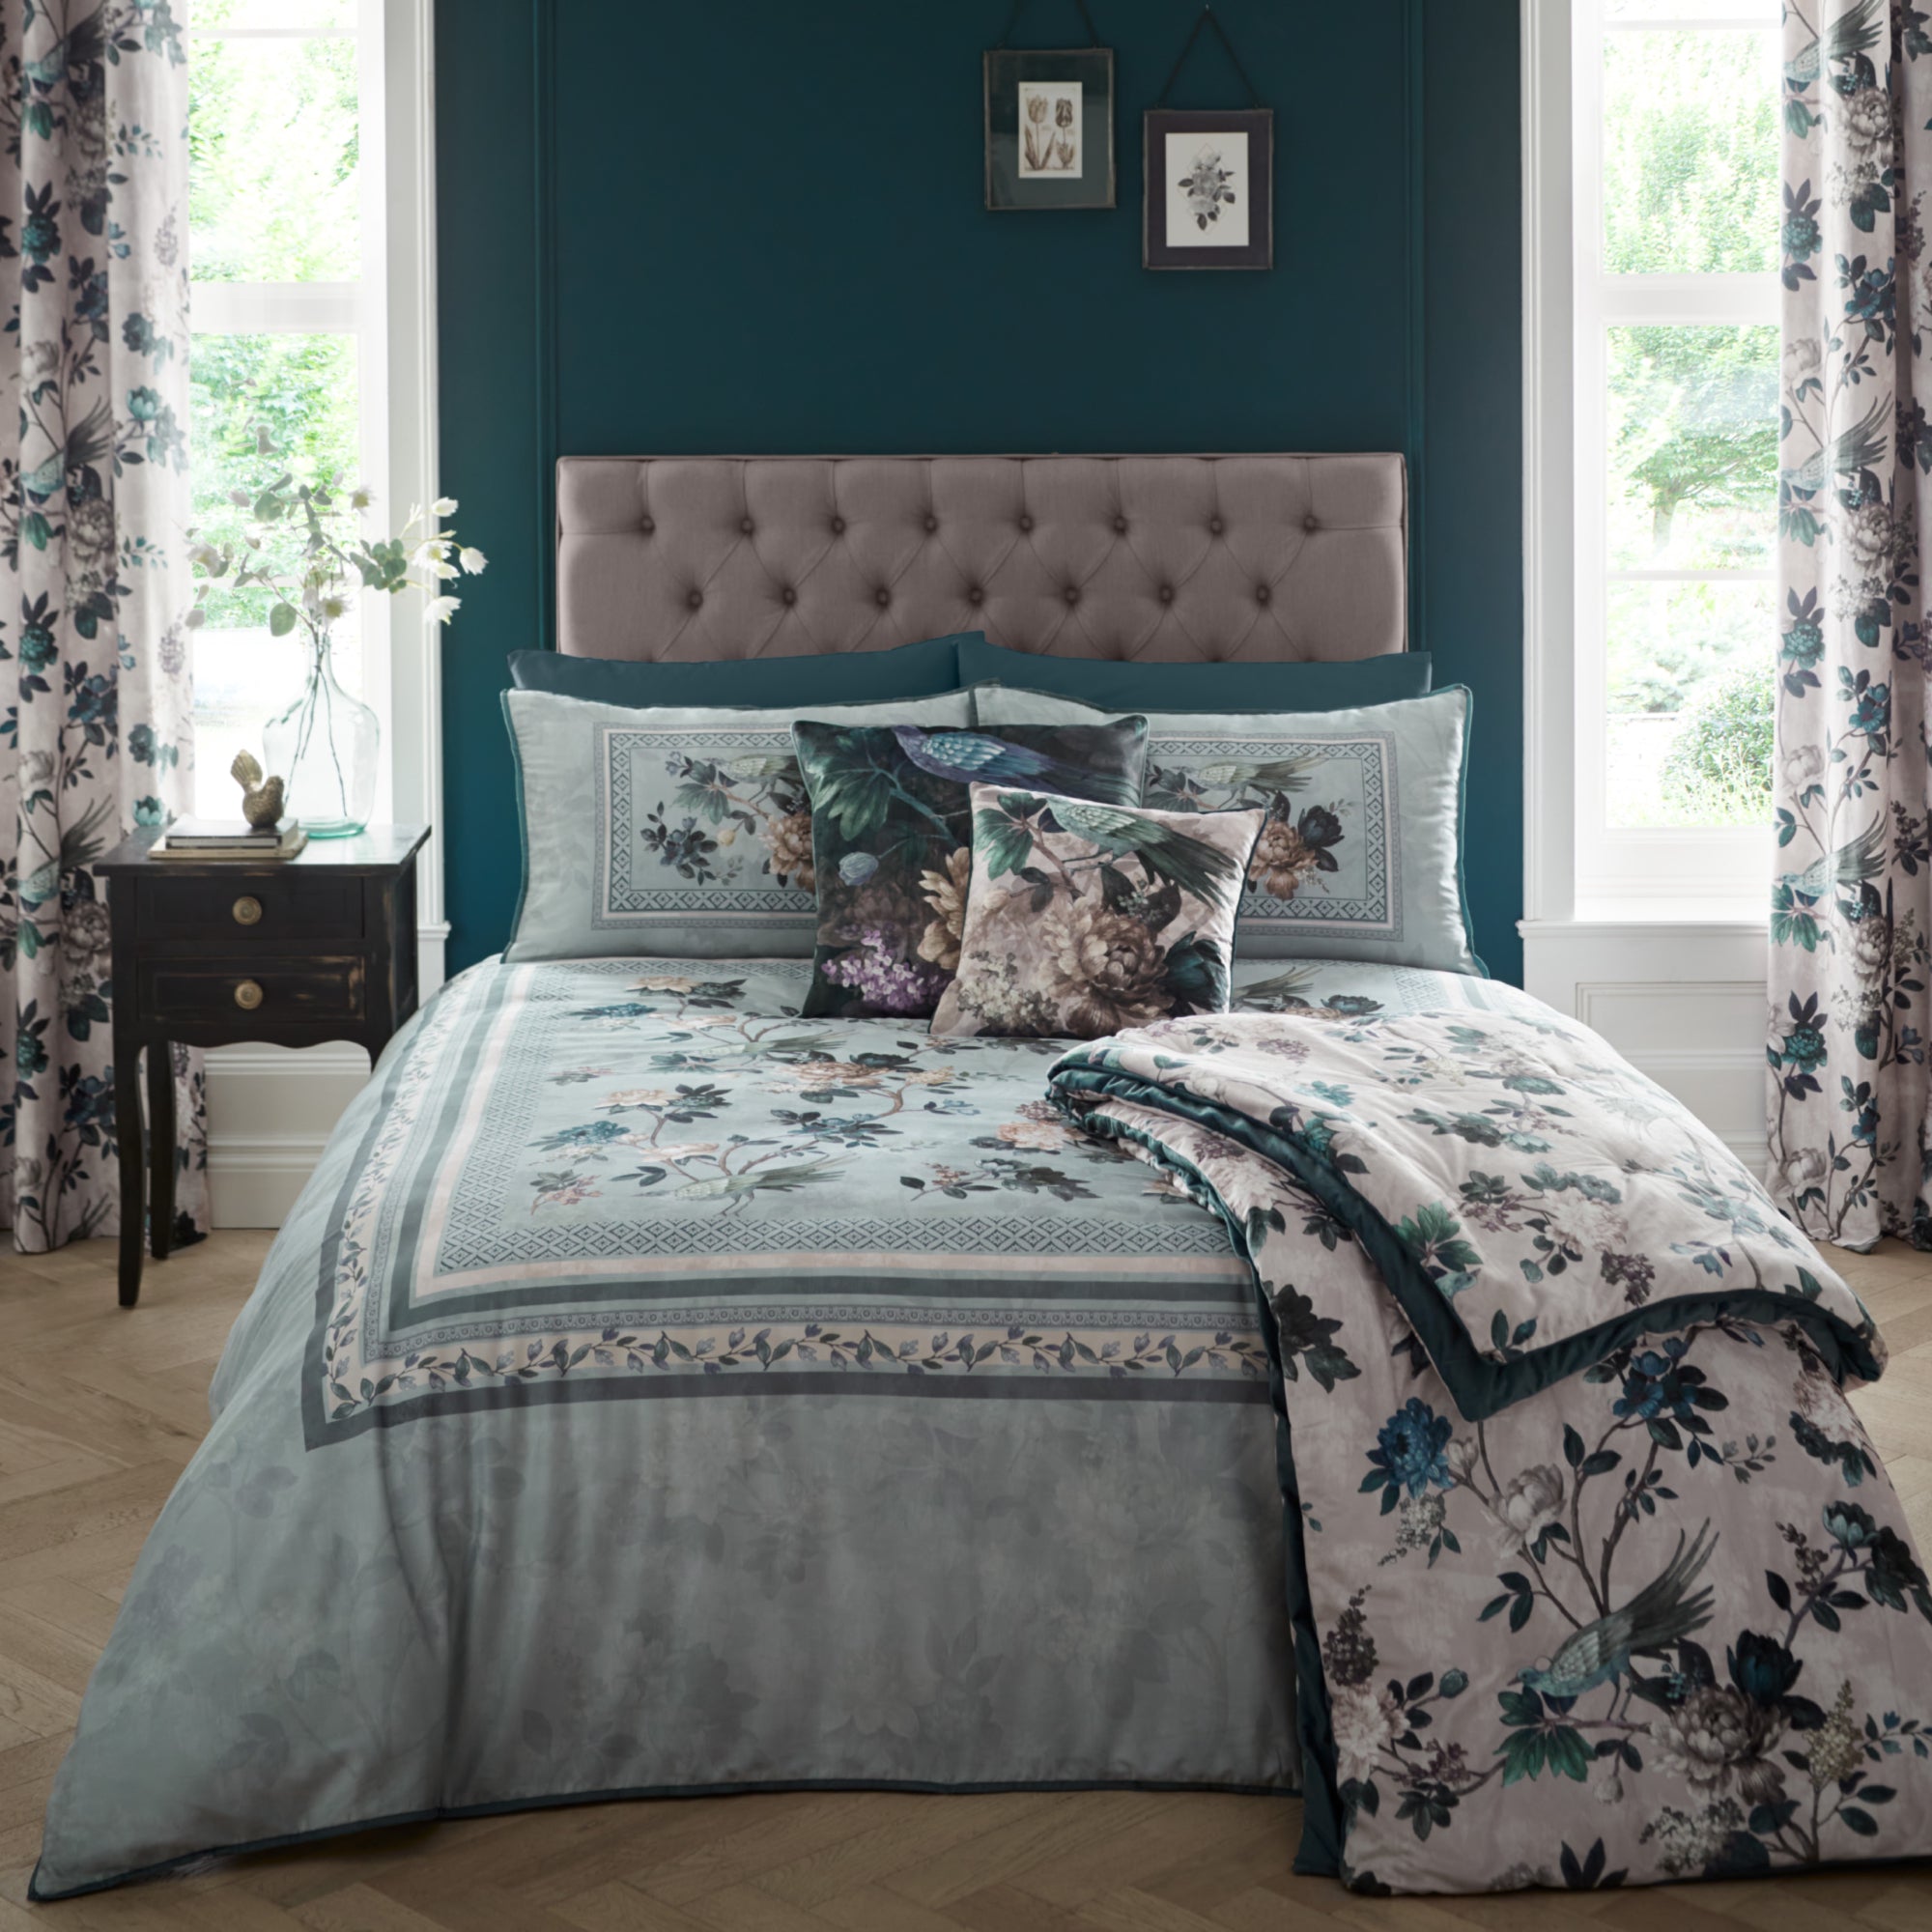 Windsford Duvet Cover Set by Appletree Heritage in Teal - Duvet Cover Set - Appletree Heritage